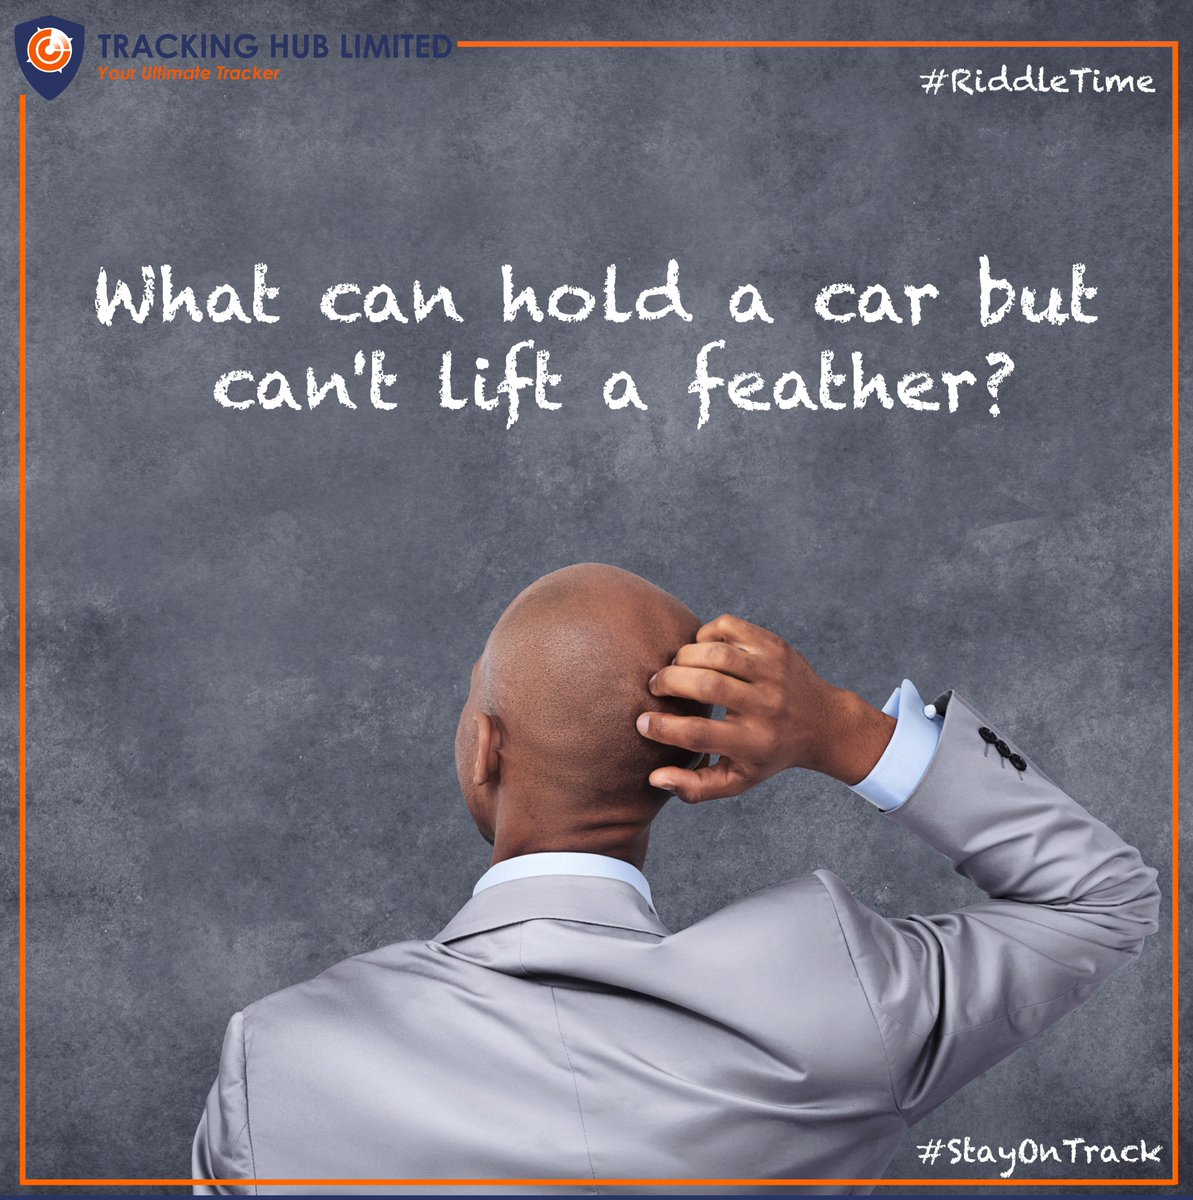 Time to put your thinking caps on! #RiddleTime Can you solve this? What can hold a car but can't lift a feather?

#Trackinghub #trackingpartner #Stayontrack #riddleoftheday